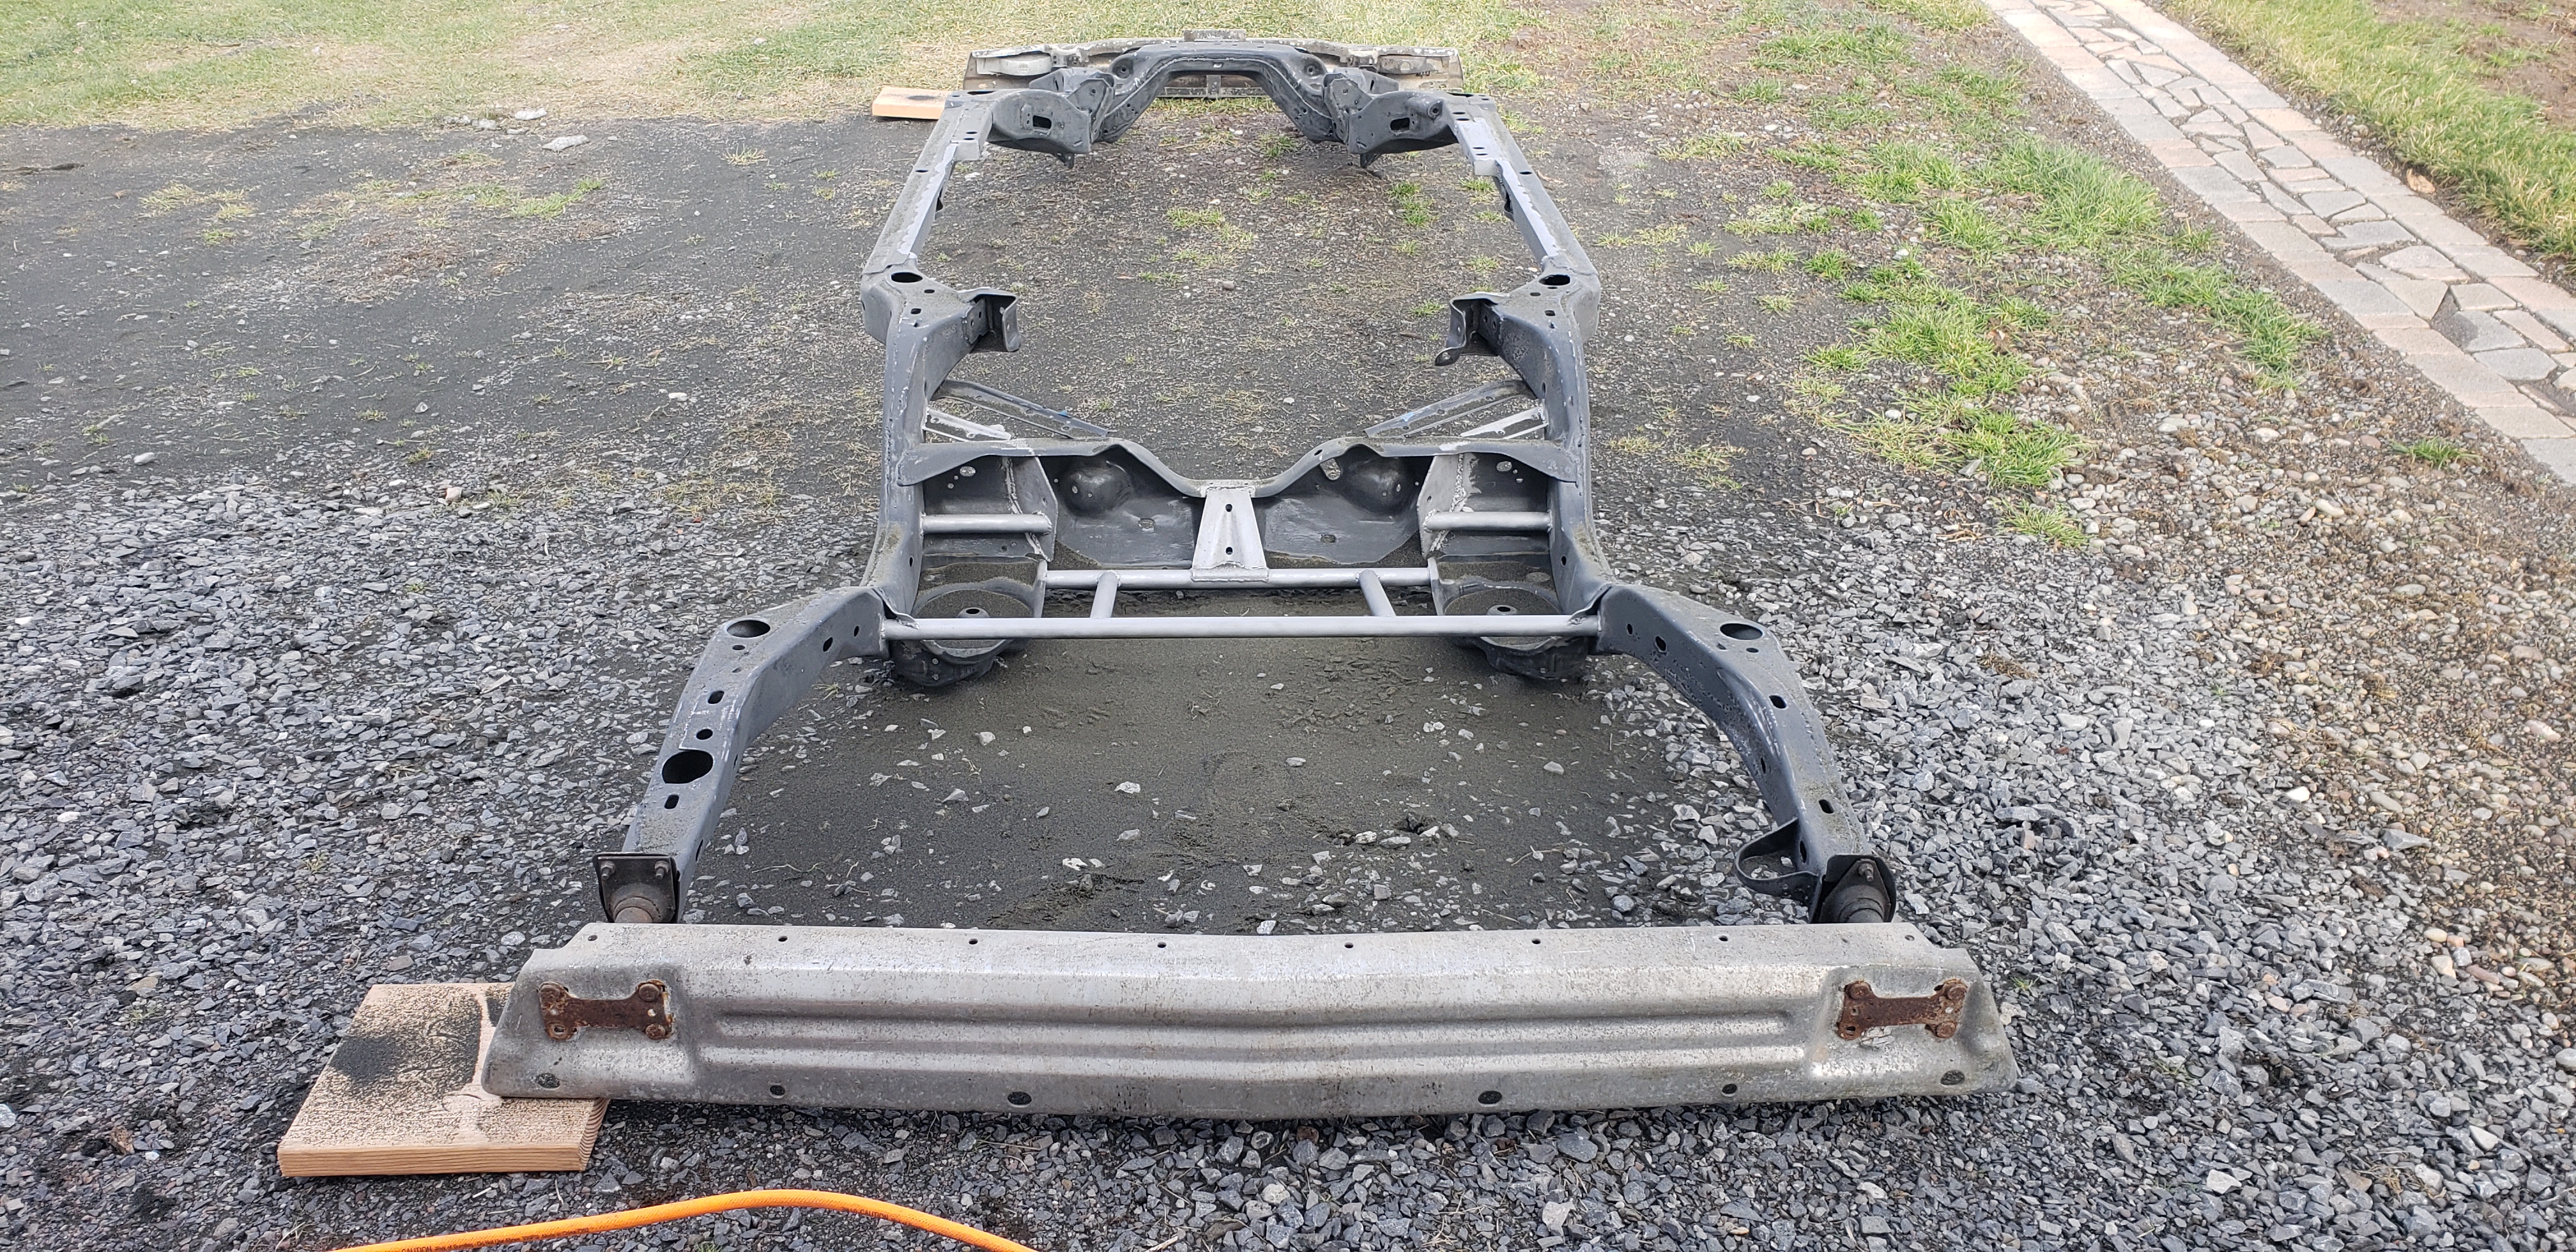 New Frame Prep For Paint After Repair And Modification (1).jpg